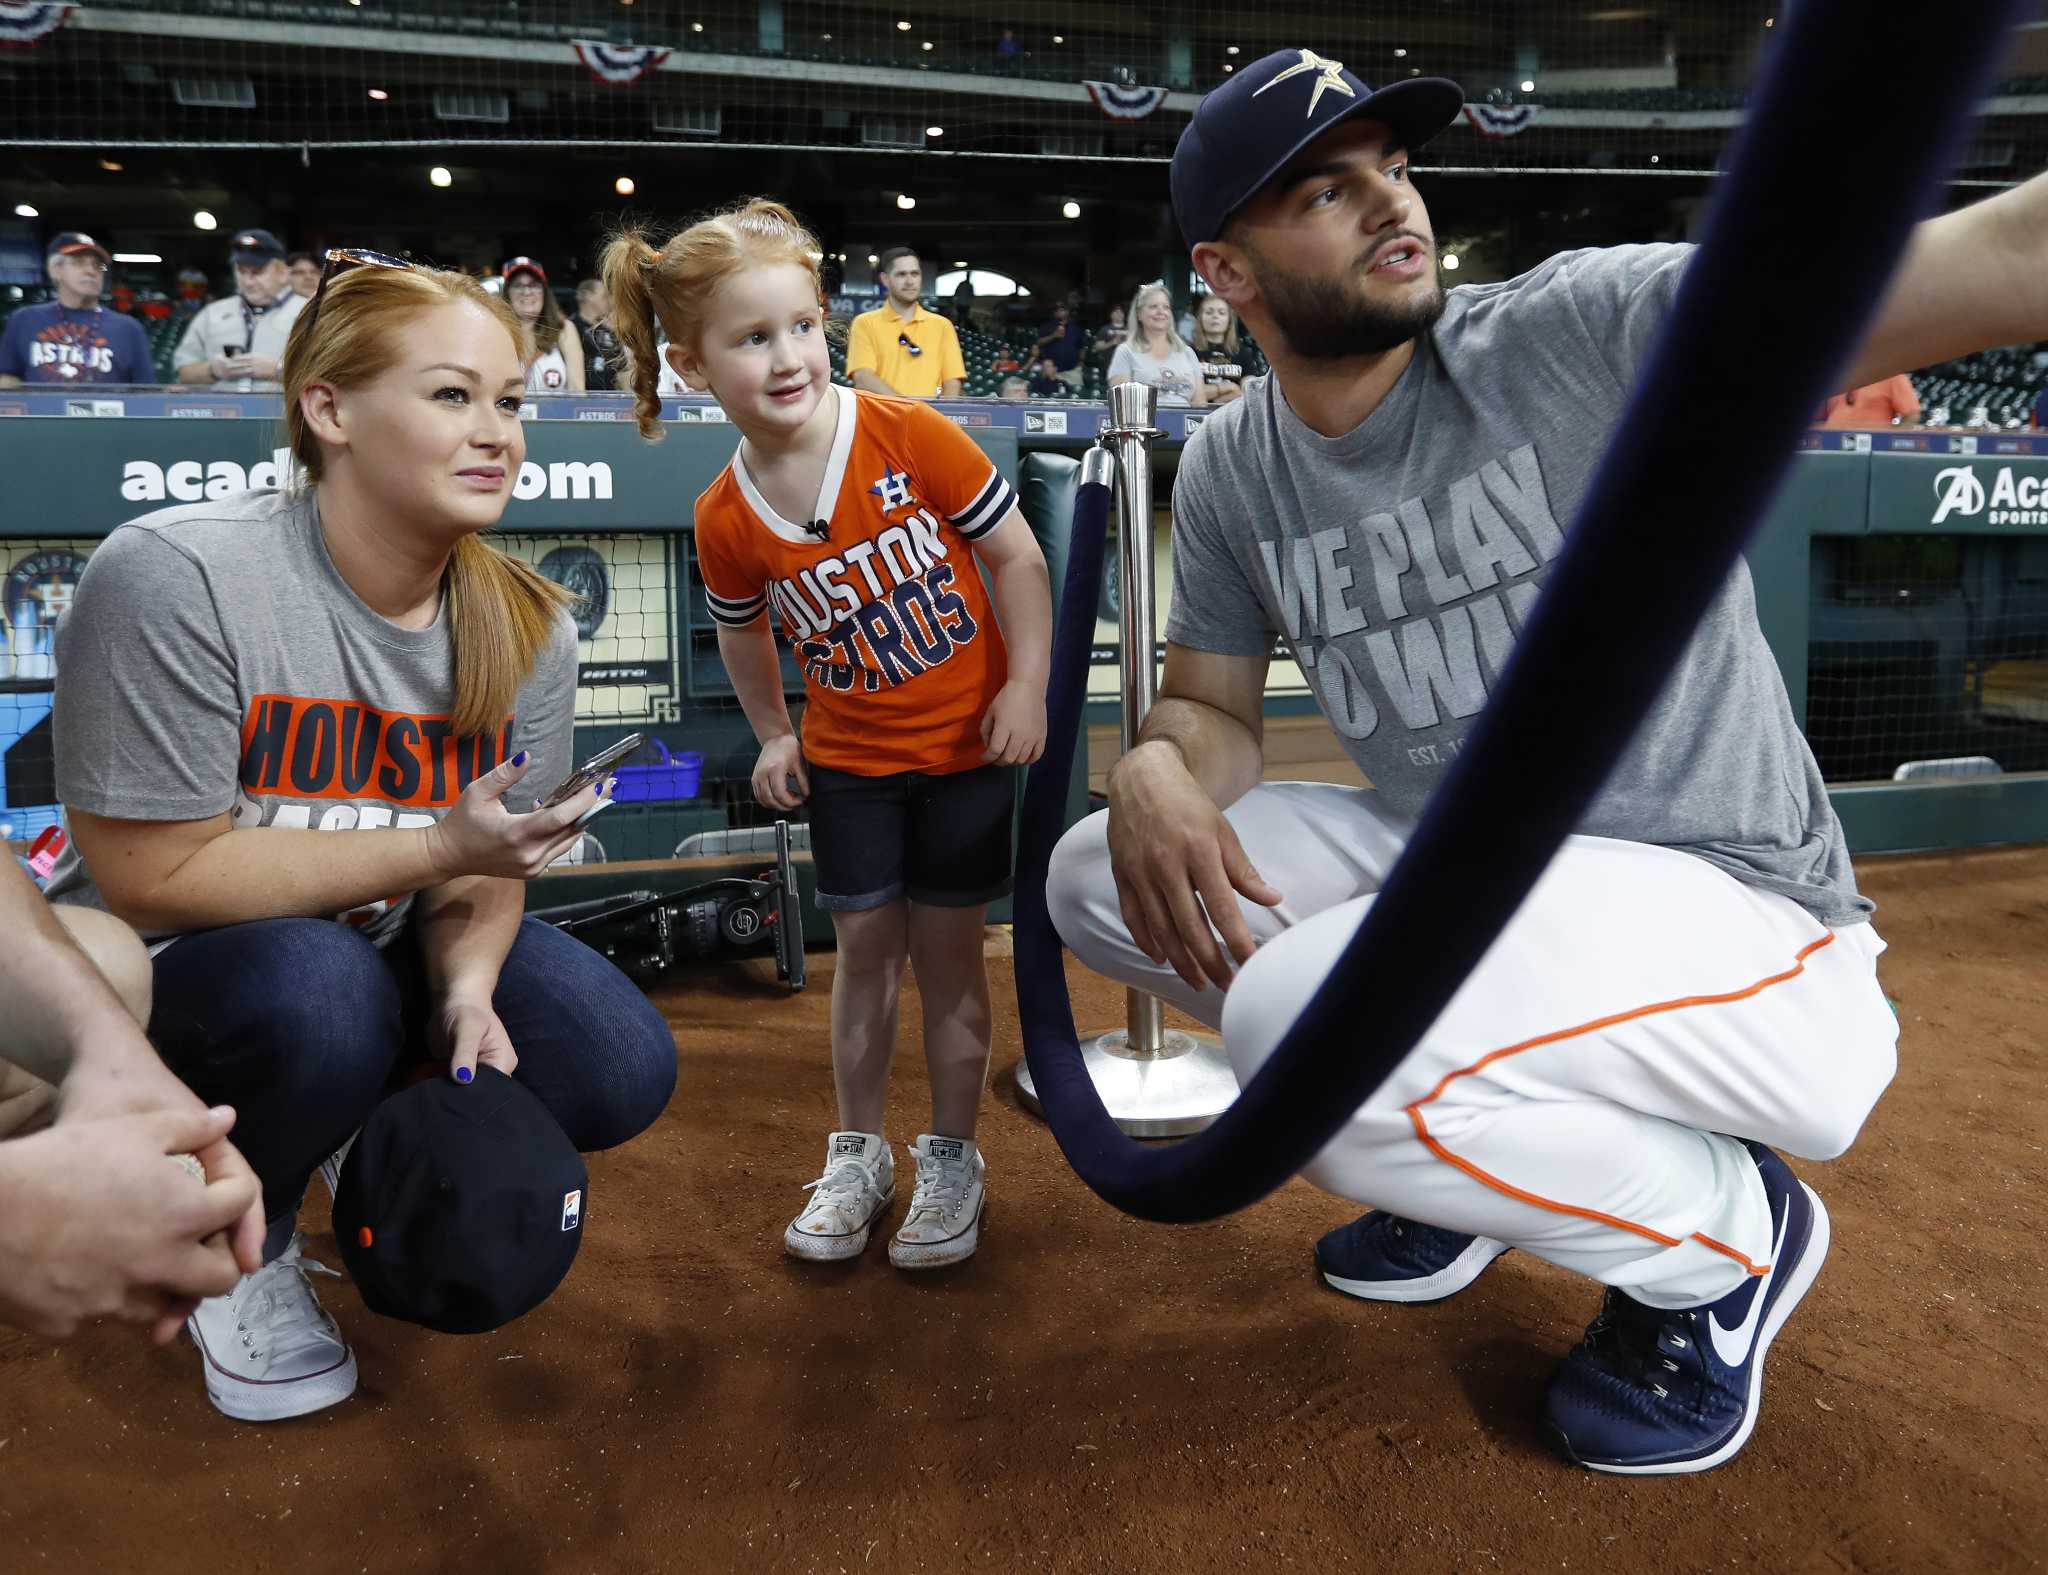 Lance McCullers meets adorable girl who said she wanted to marry him